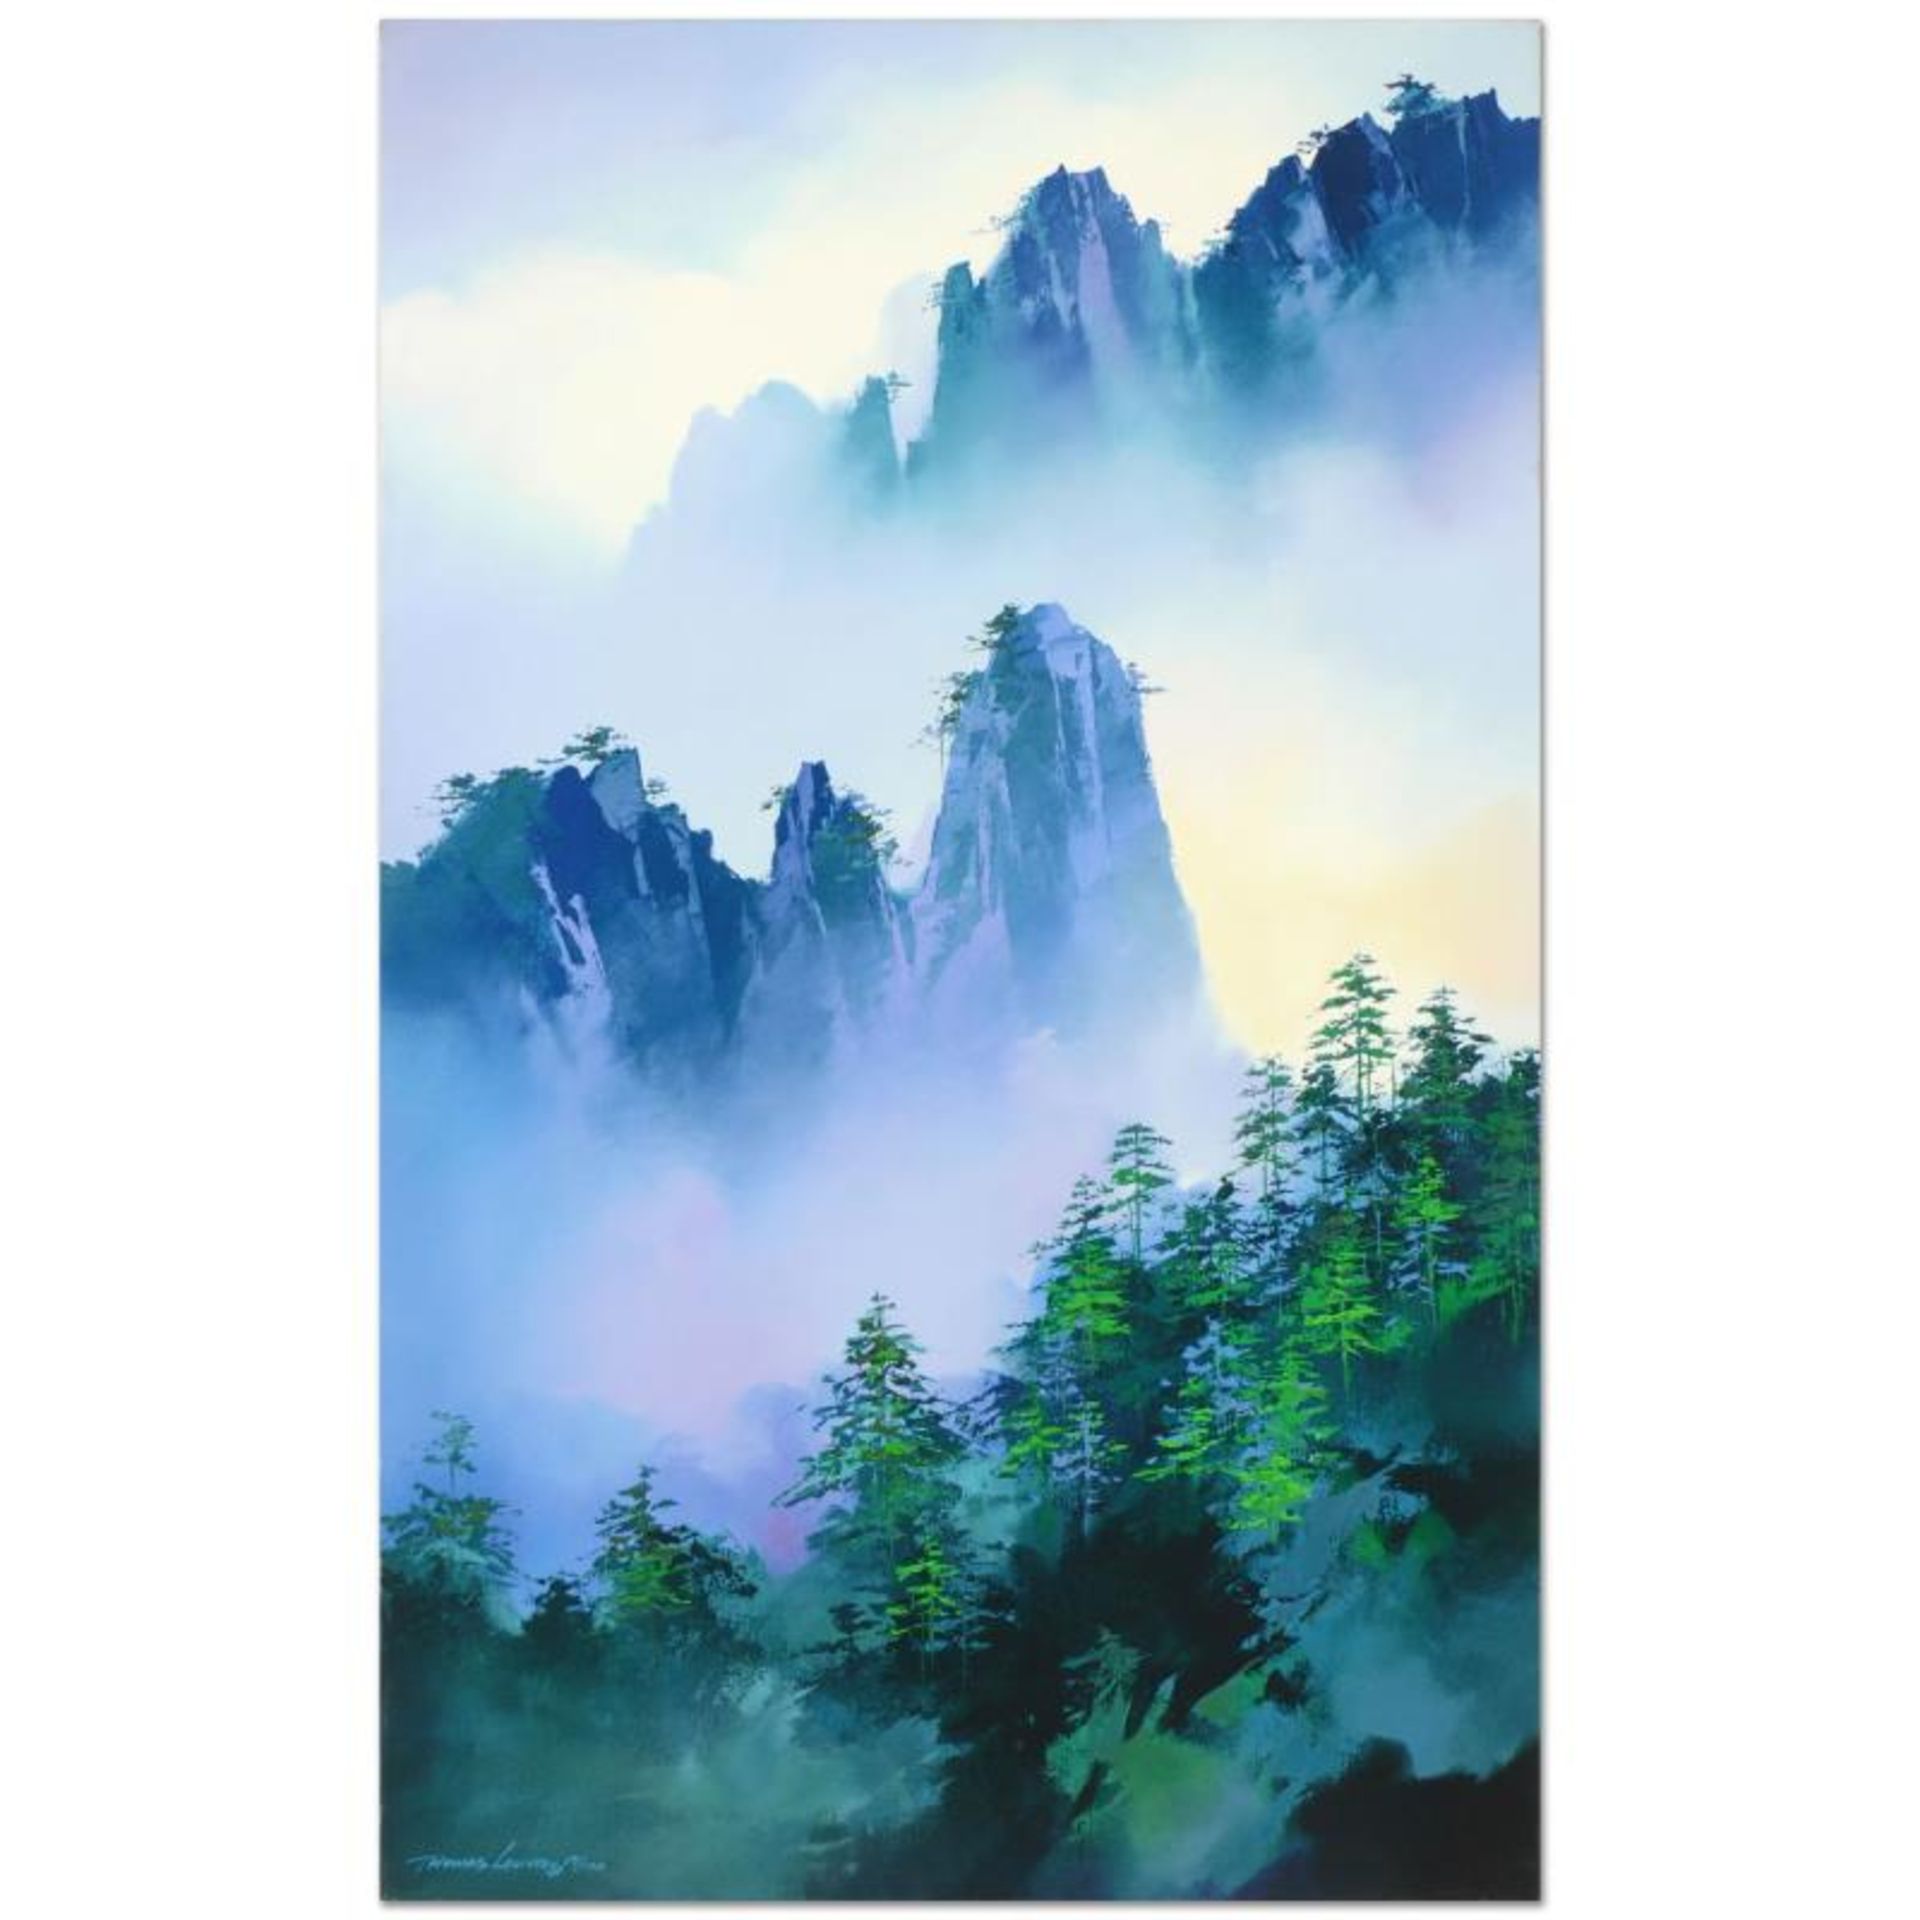 Thomas Leung, "Misty Mountain Passage" Hand Embellished Limited Edition, Numbere